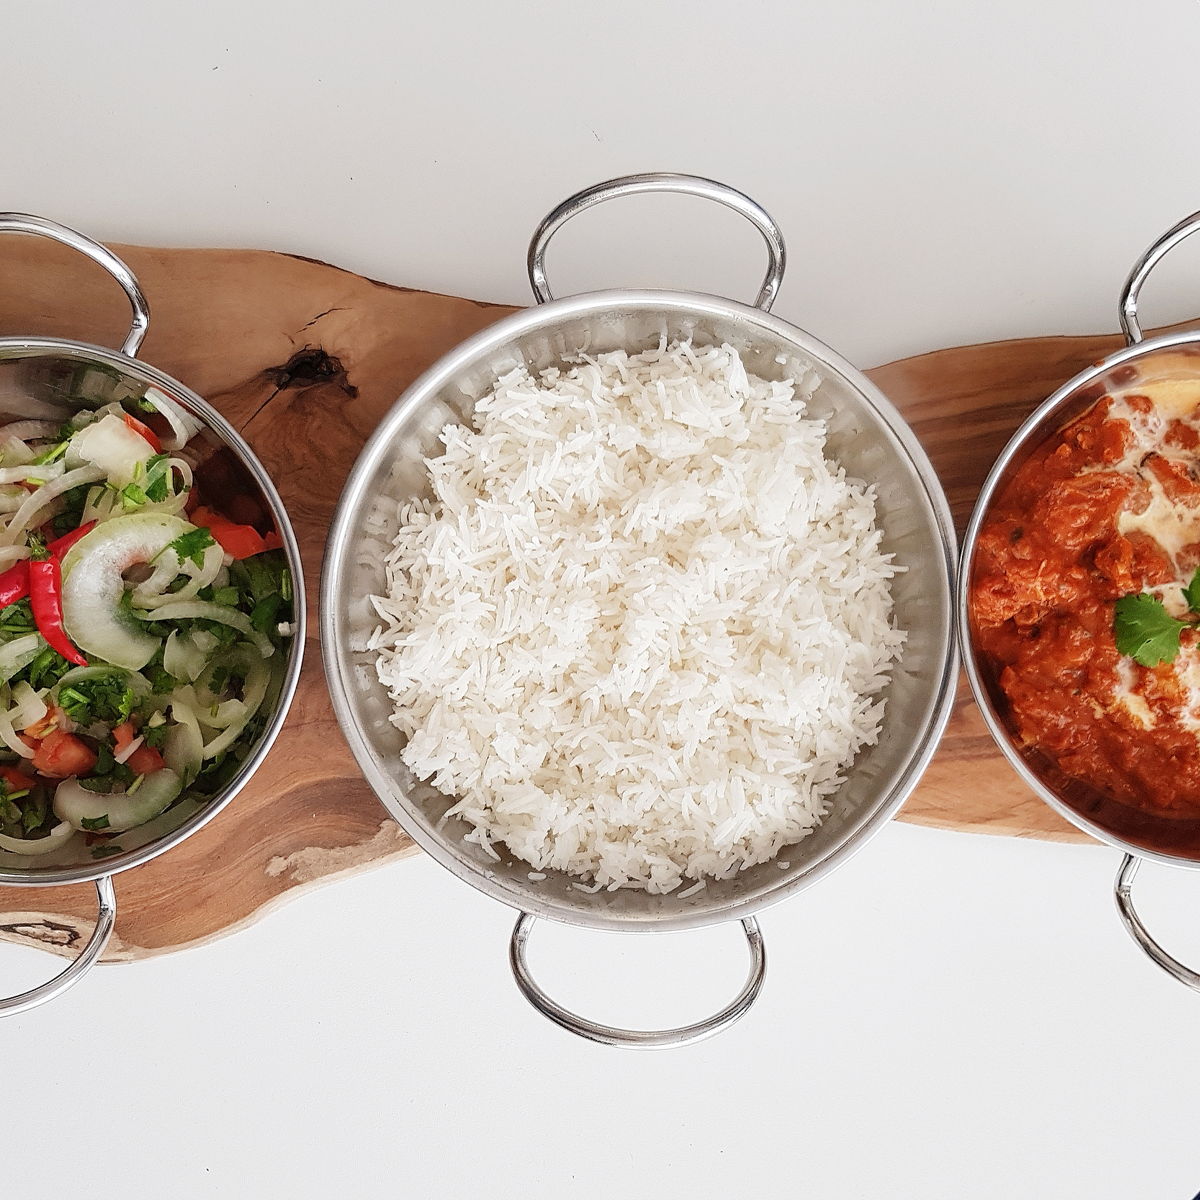 Learn how to cook (and eat) authentic indian food!